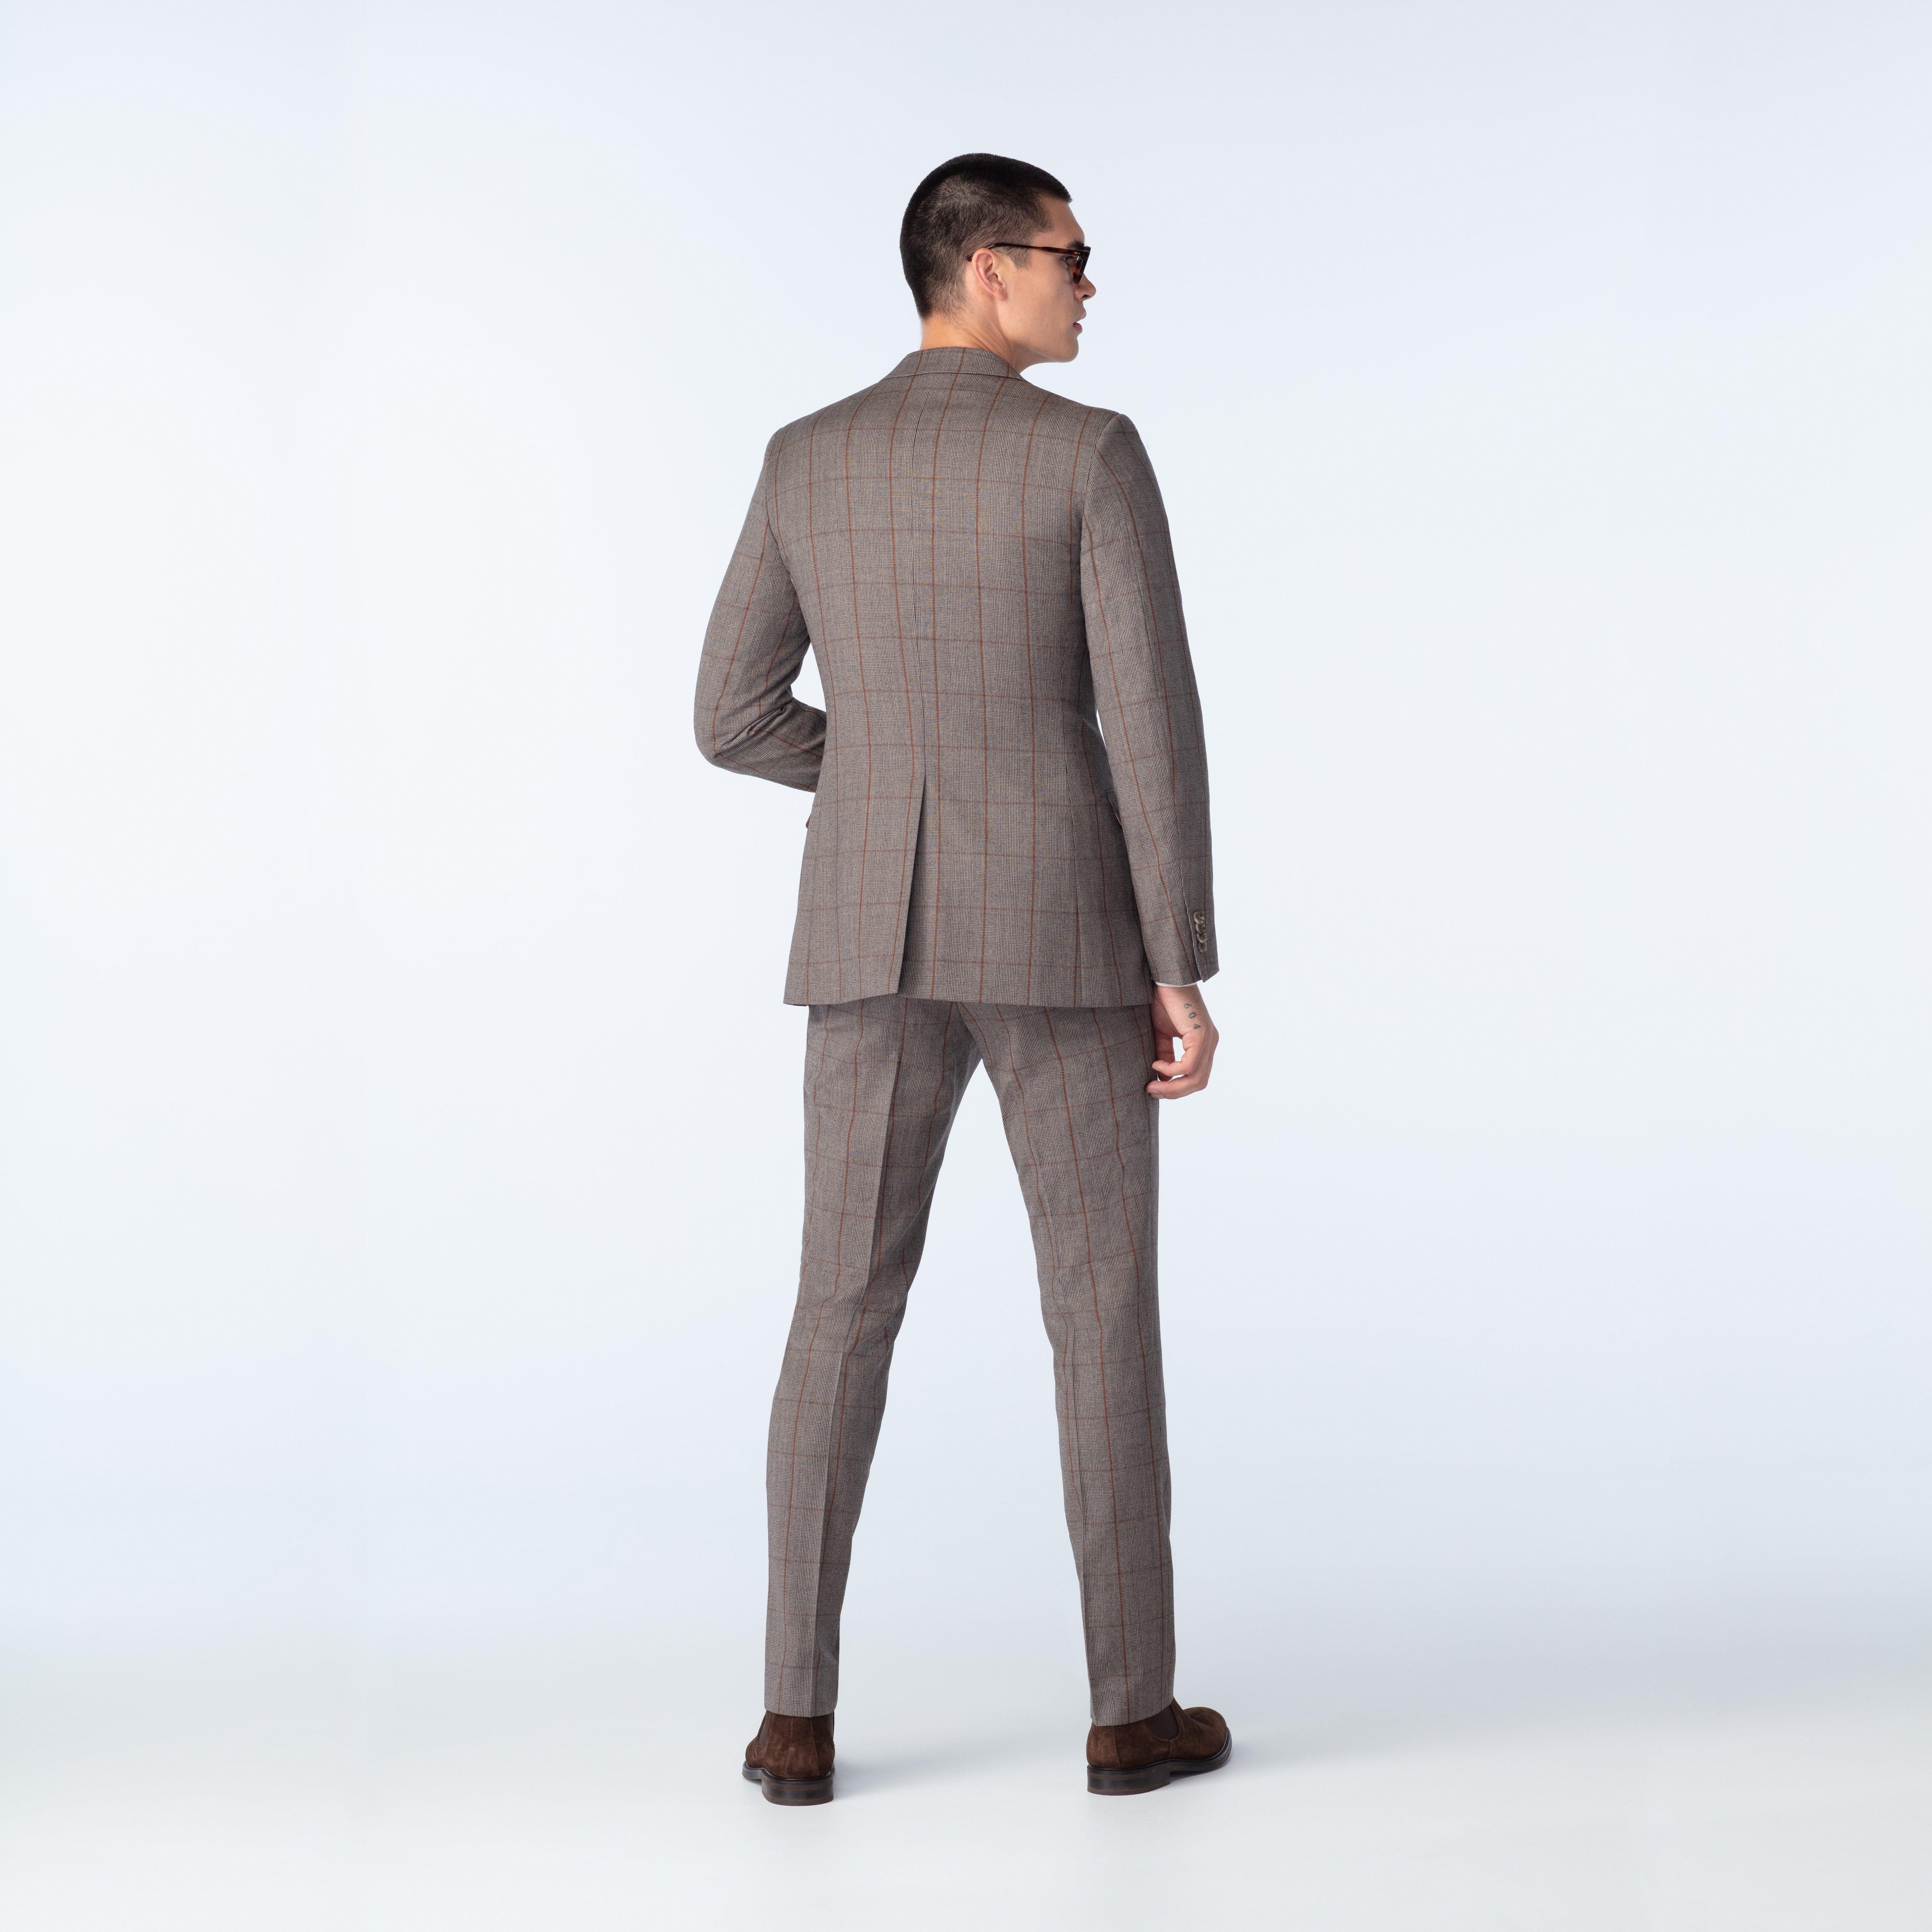 Guildford Prince of Wales Light Brown Suit